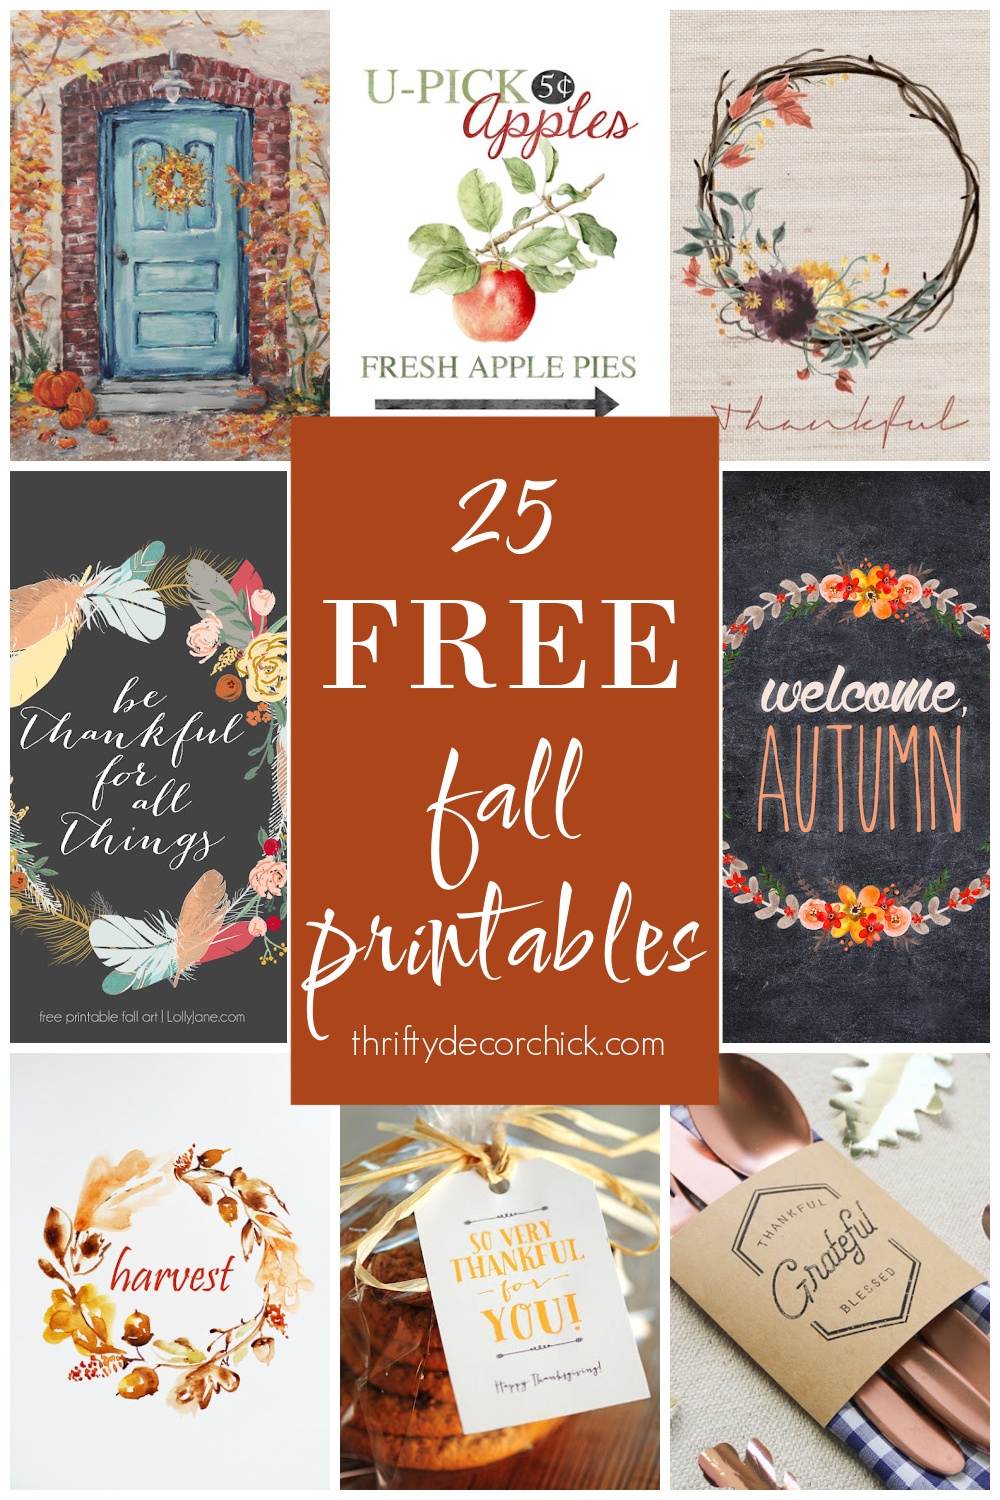 25 Free Fall Printables For Autumn Decorating Thrifty Decor Chick Thrifty DIY Decor And Organizing